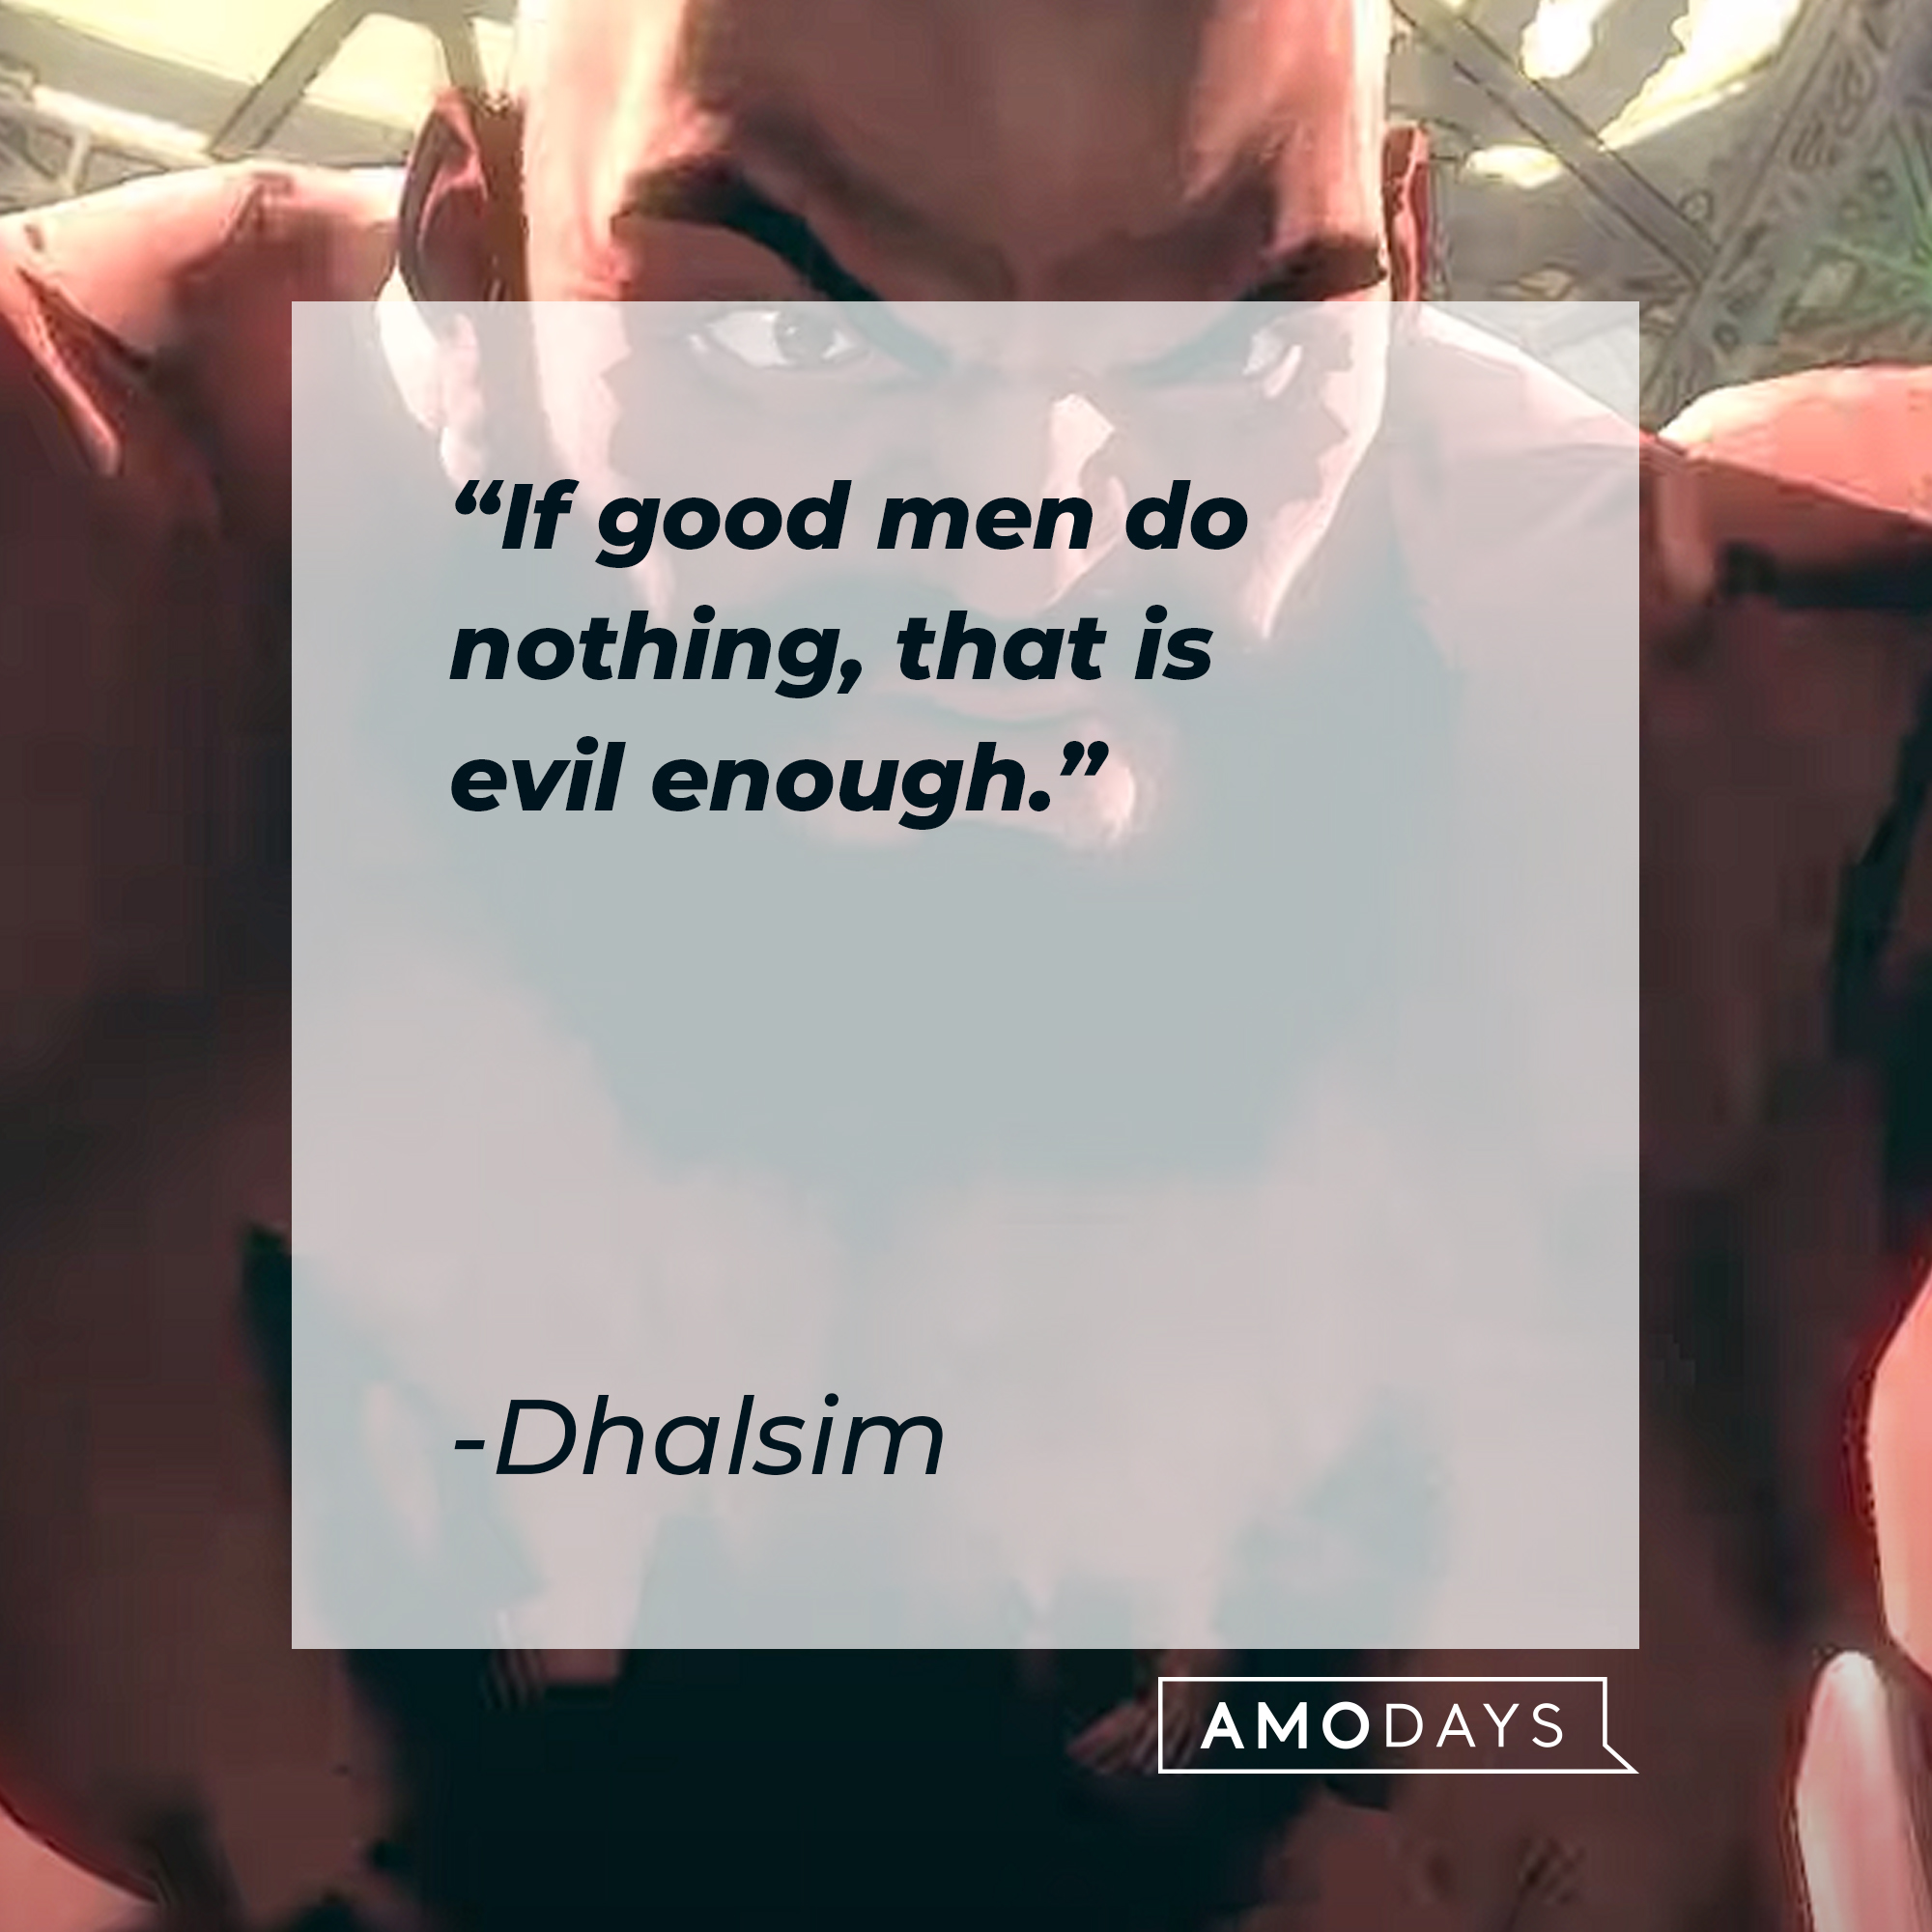 Dhalsim's quote: "If good men do nothing, that is evil enough." | Source: youtube.com/PlayStation